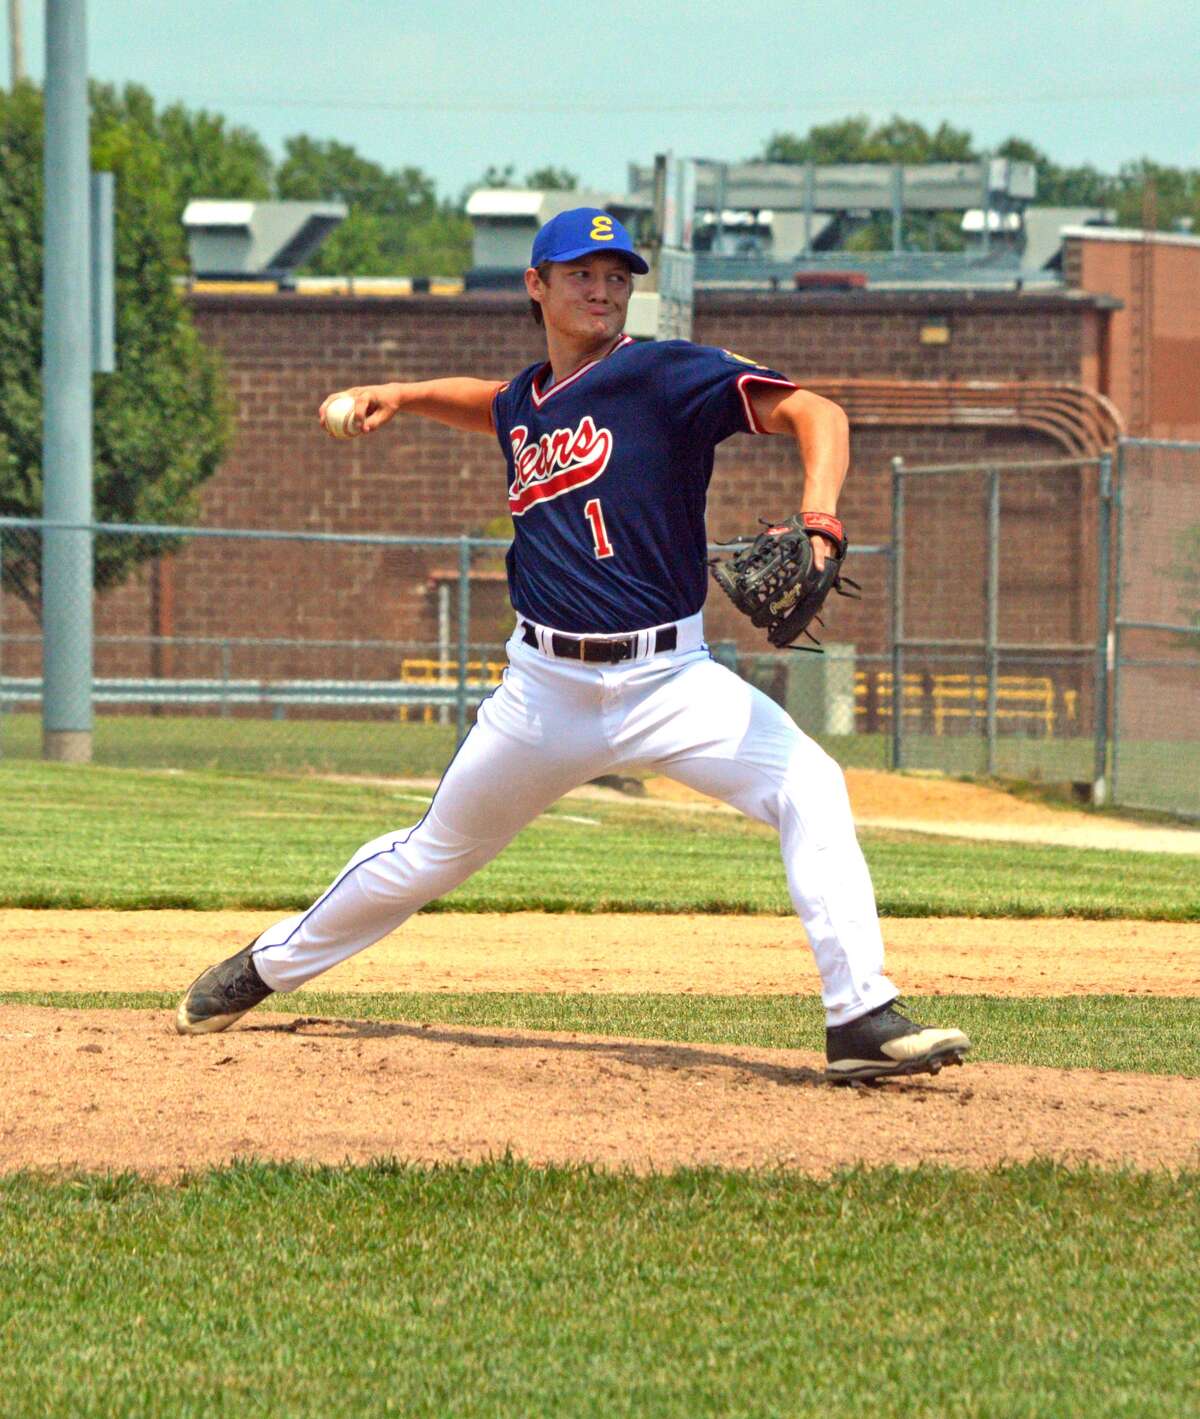 Zach Seavers of the Edwardsville Bears delivers a pitch during the first inning of Monday’s game against Steeleville in the Fifth Division Tournament at Glik Park in Highland.